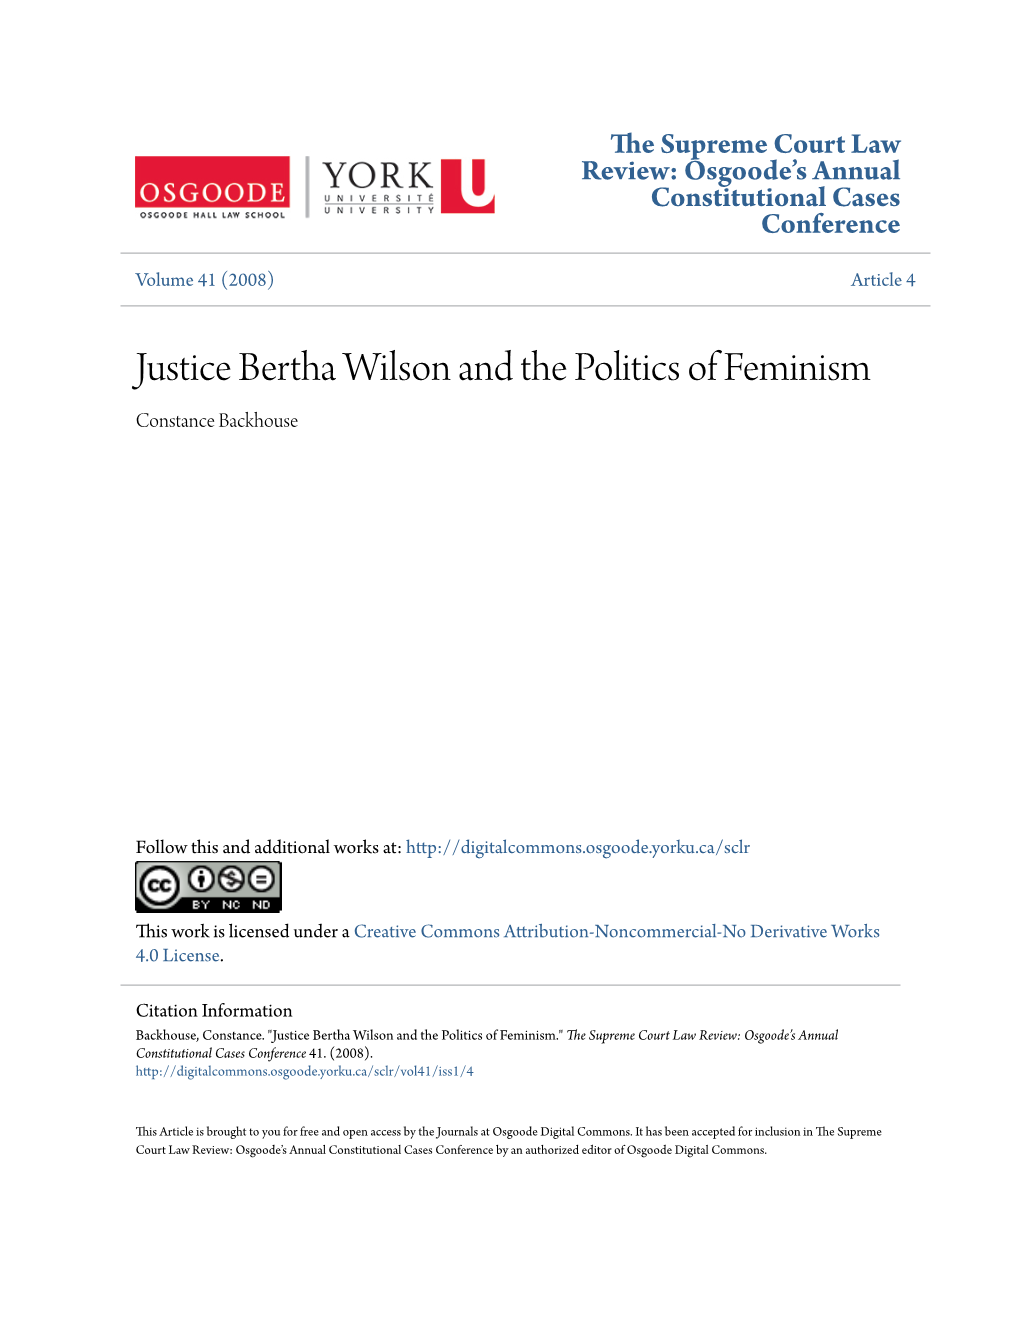 Justice Bertha Wilson and the Politics of Feminism Constance Backhouse